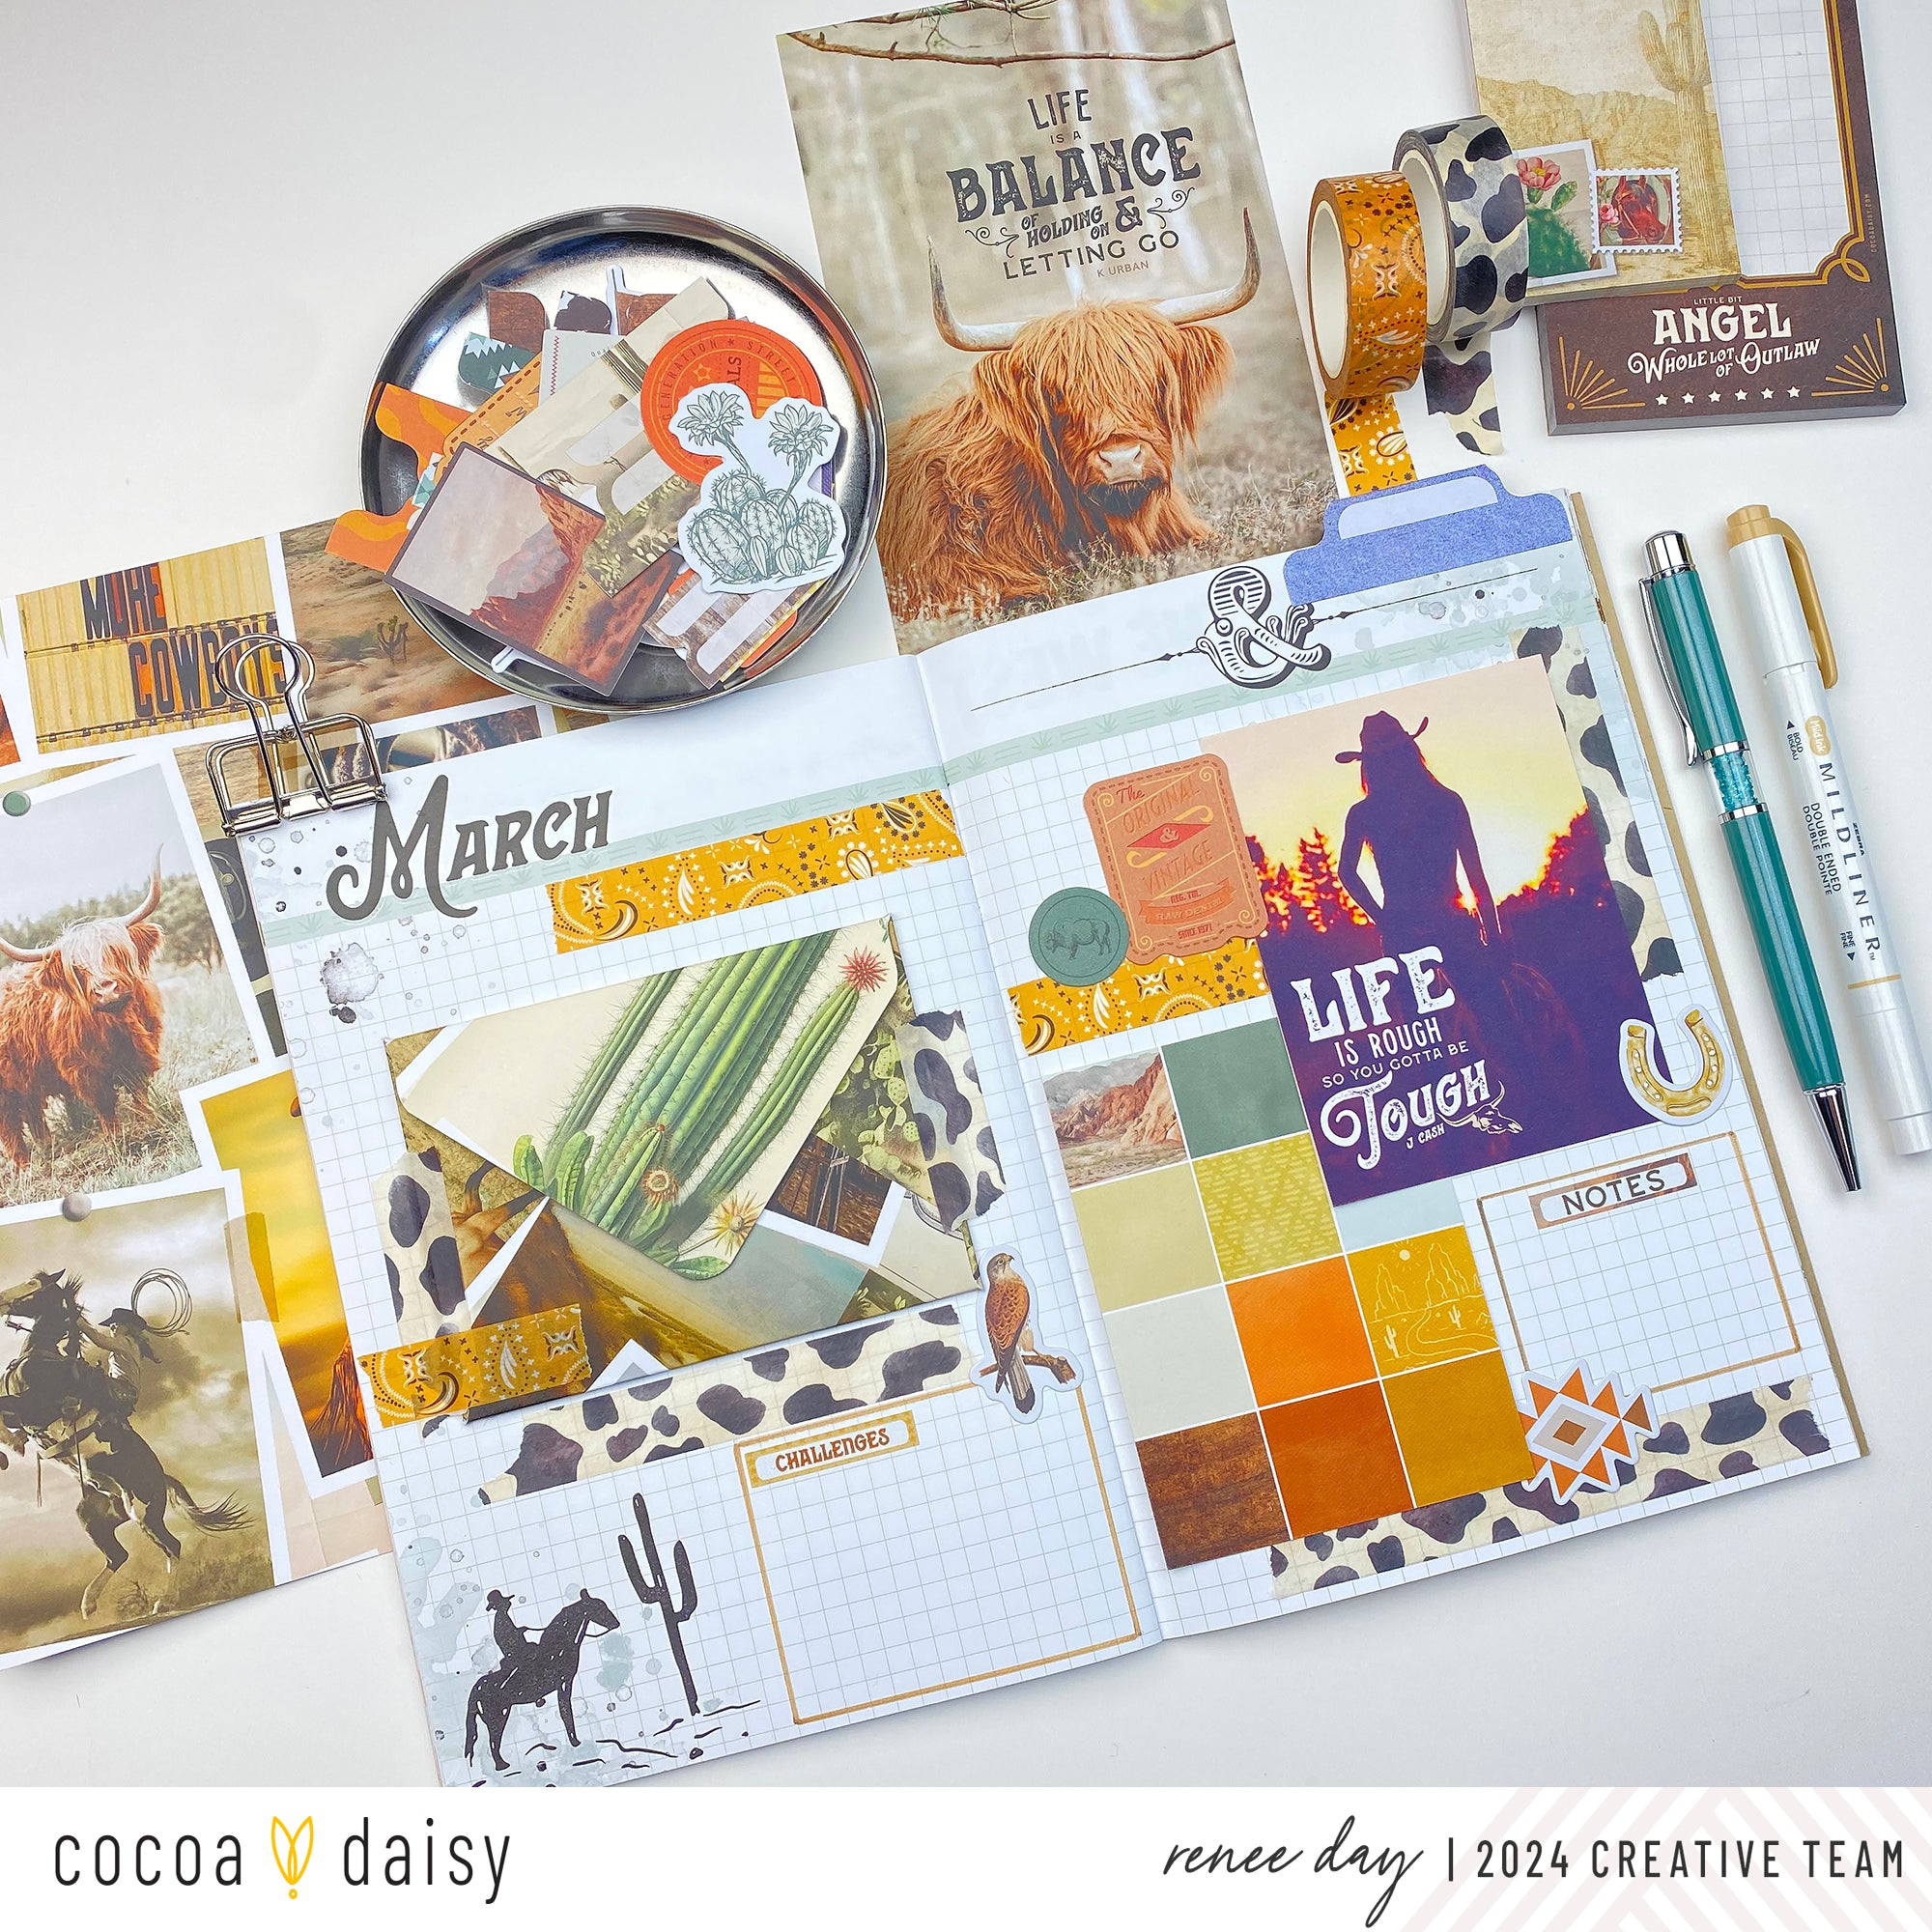 Get Creative with the Big Sky Planner Kits!